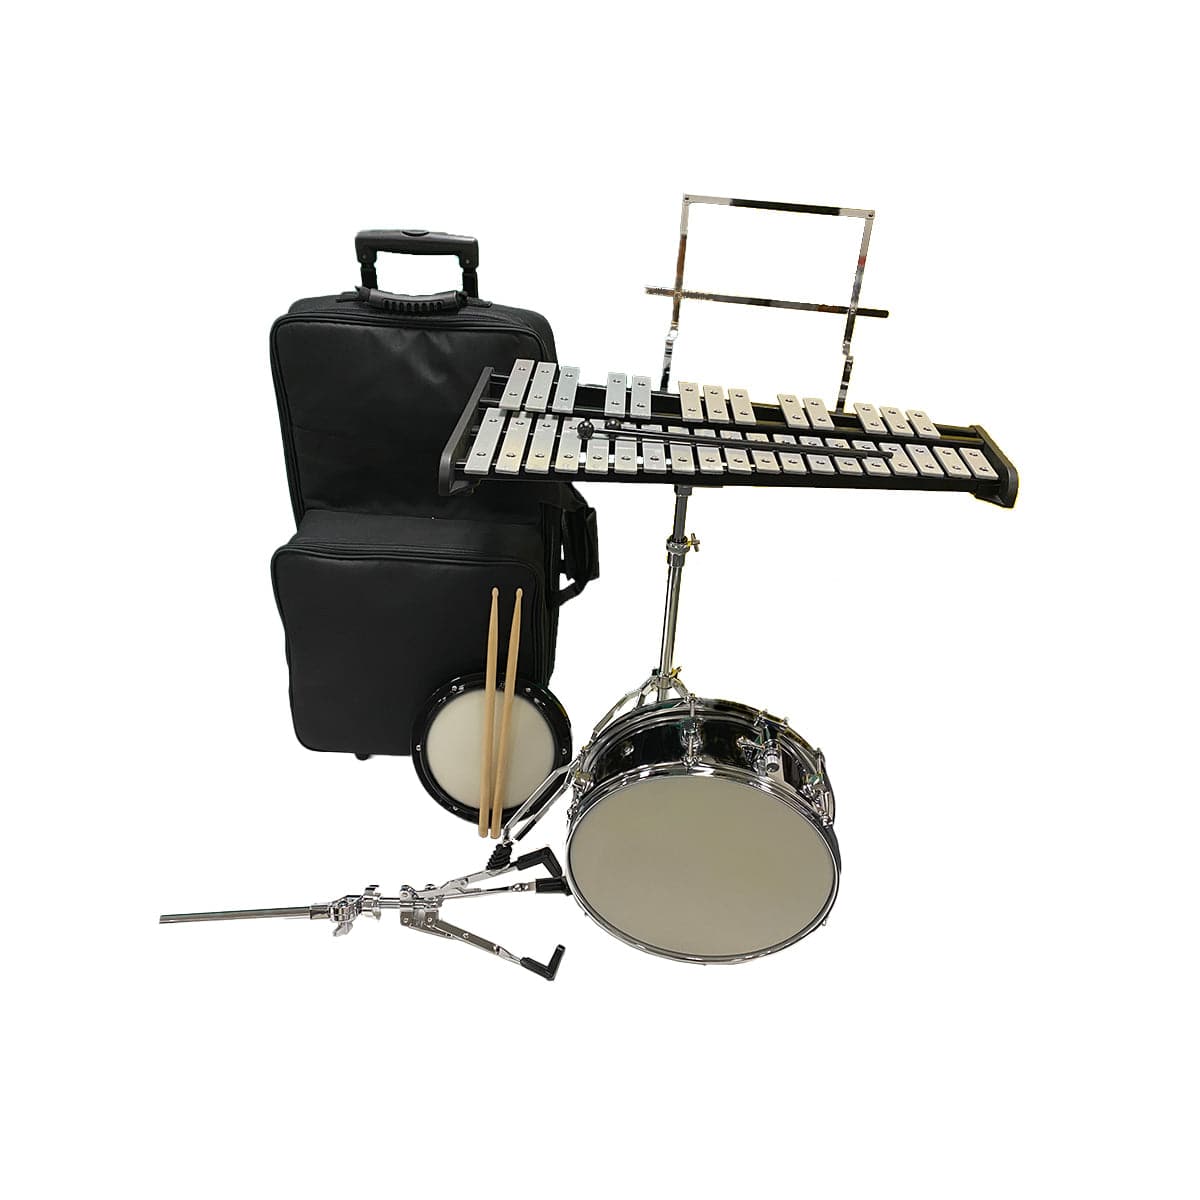 Cannon Combination 32 Bell & Snare Kit w/Trolley Bag